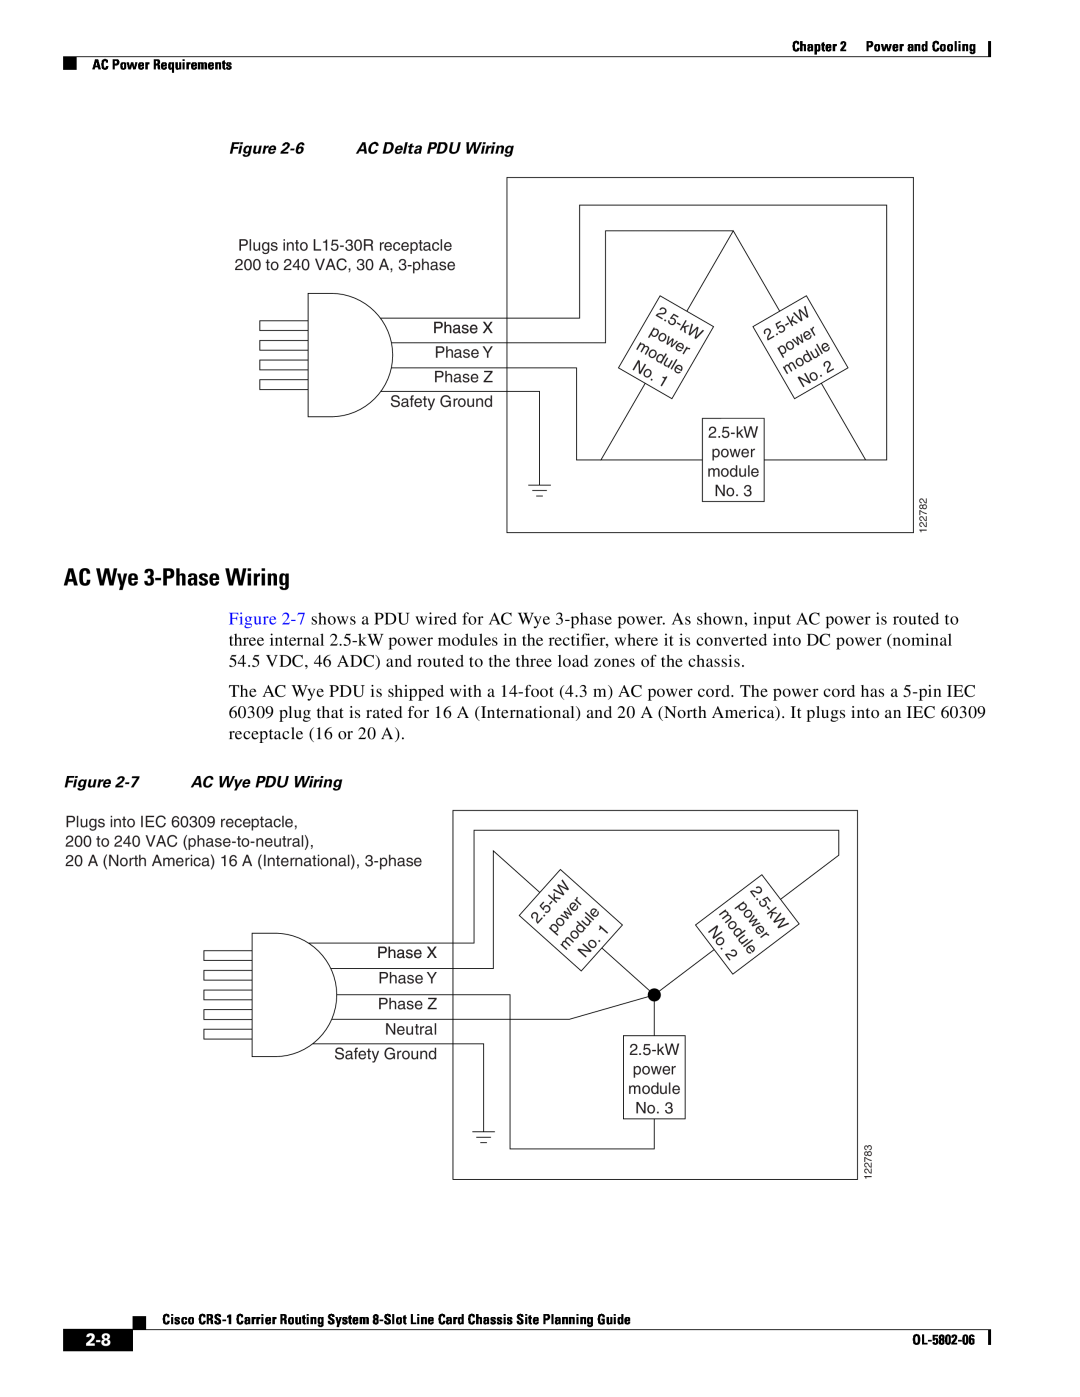 Cisco Systems CRS-1 manual AC Wye 3-Phase Wiring, Nopower, module 